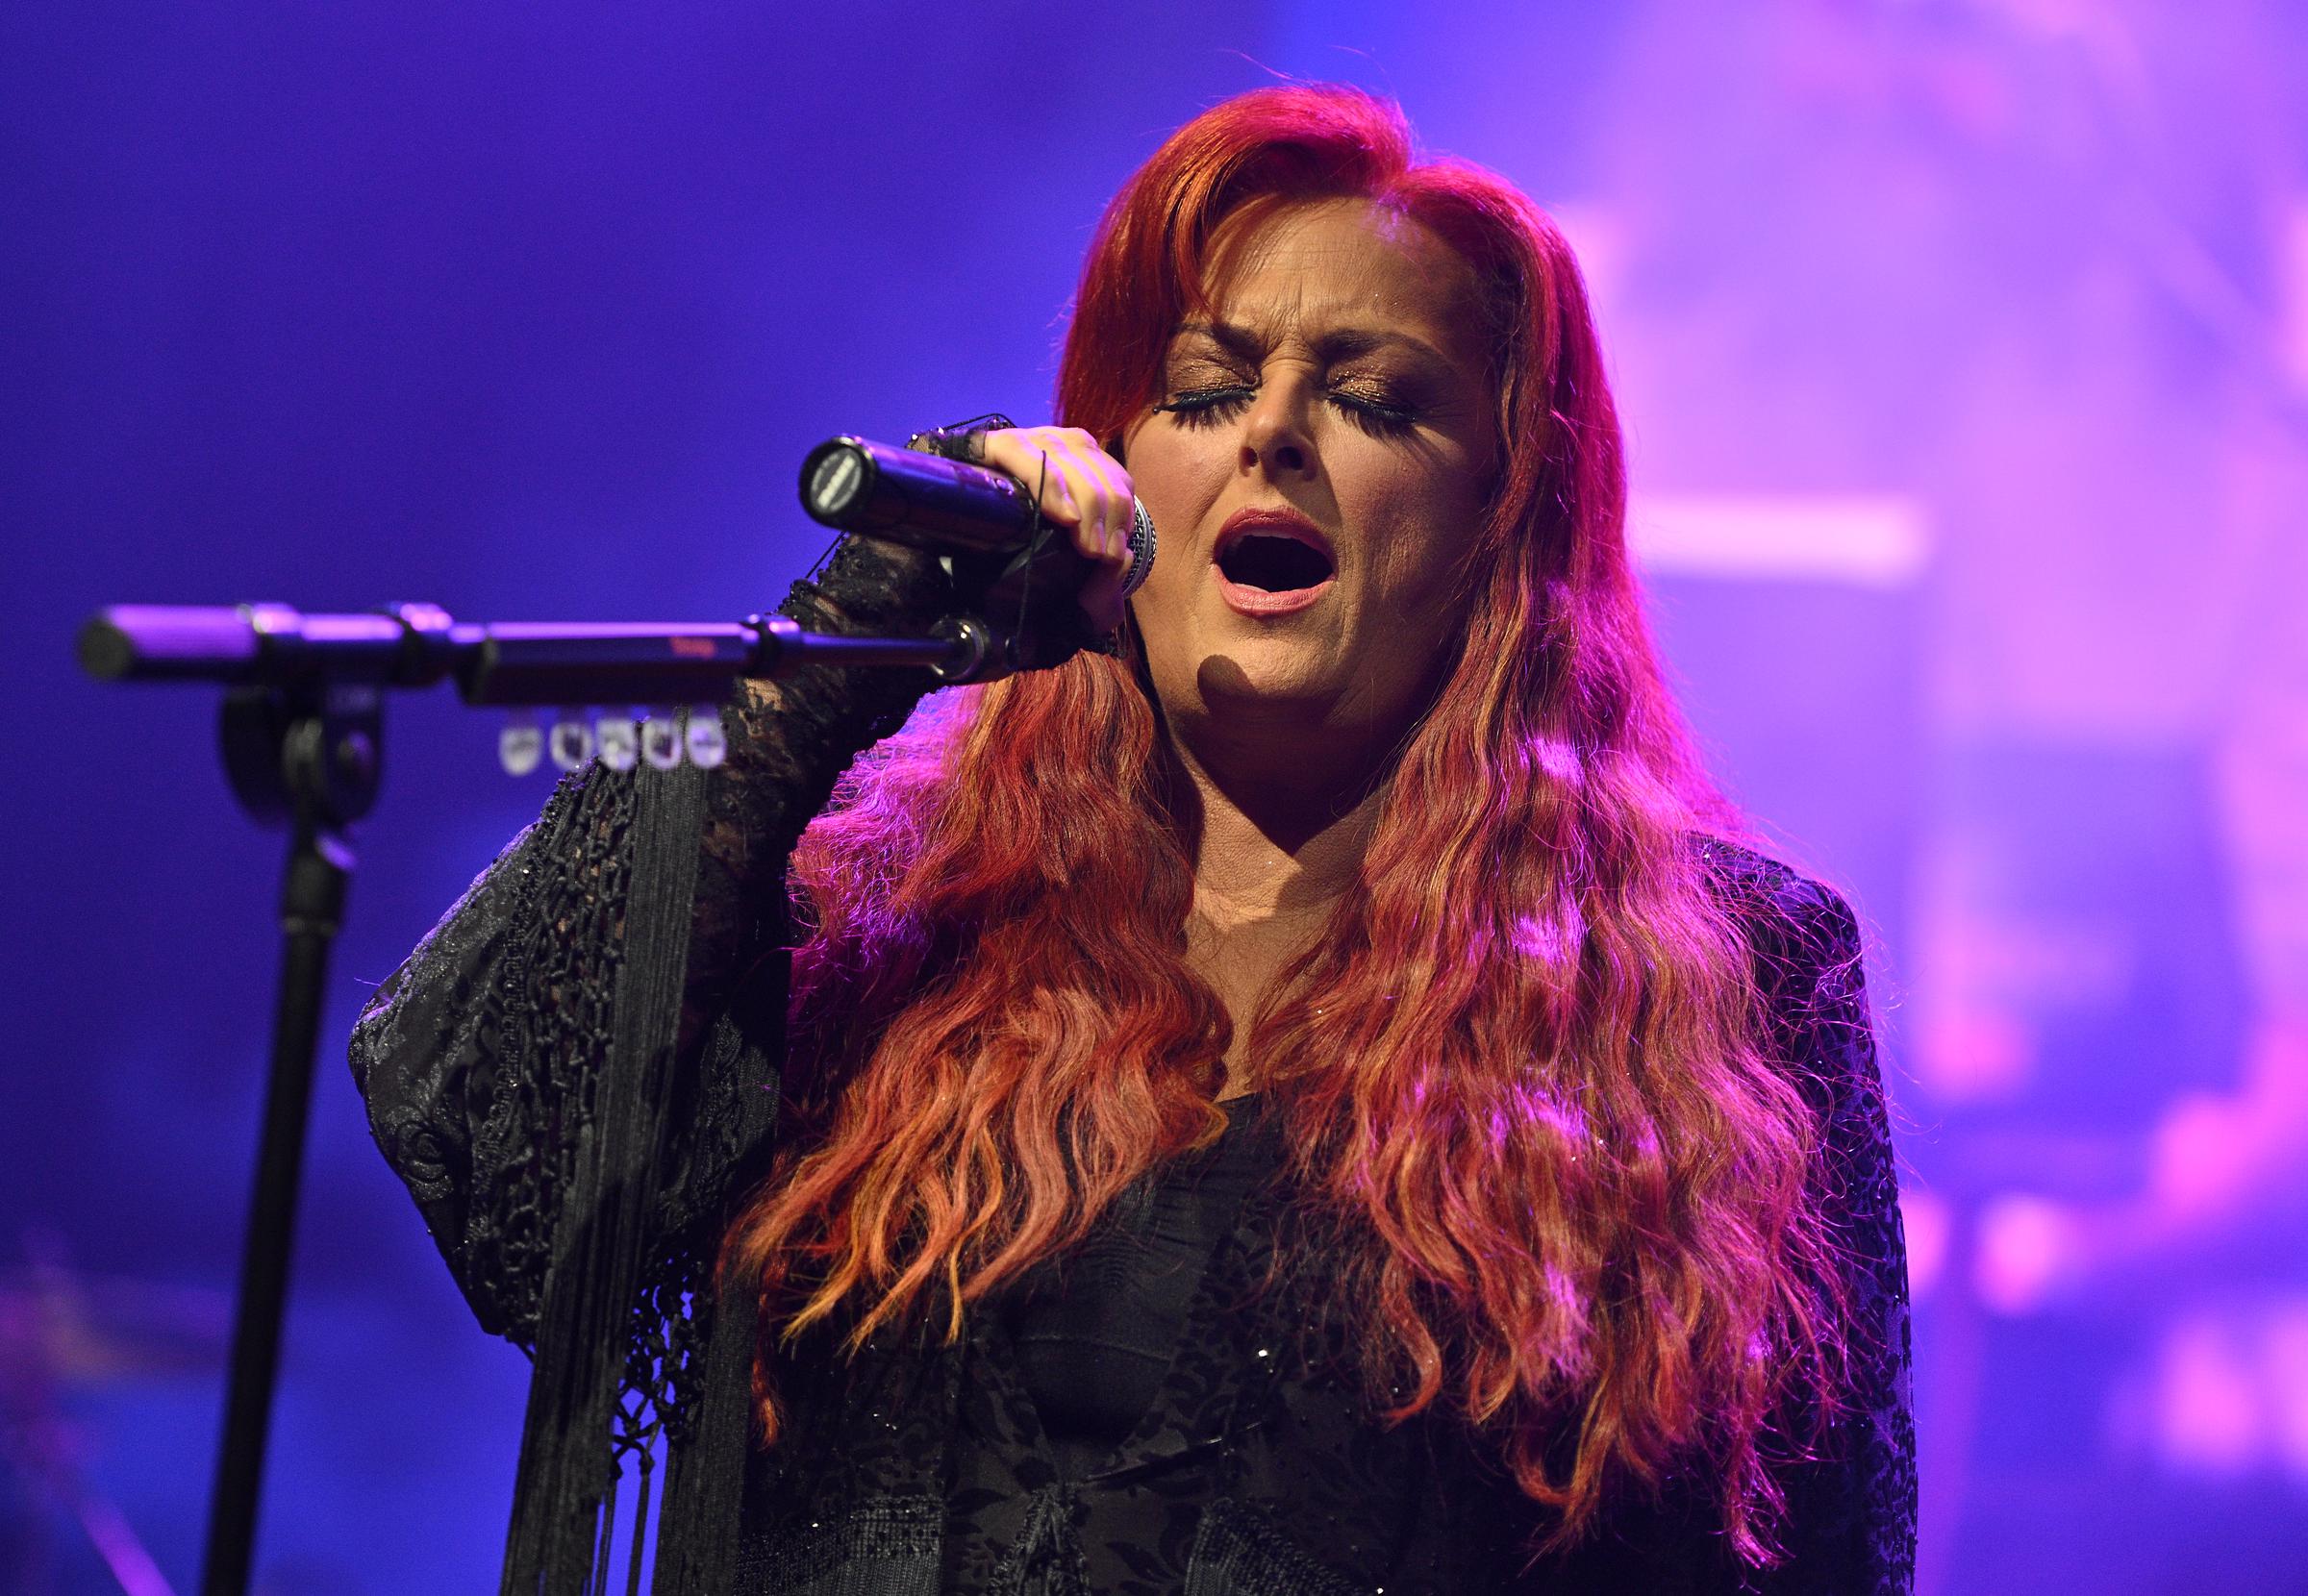 Wynonna Judd on November 12, 2022 | Source: Getty Images